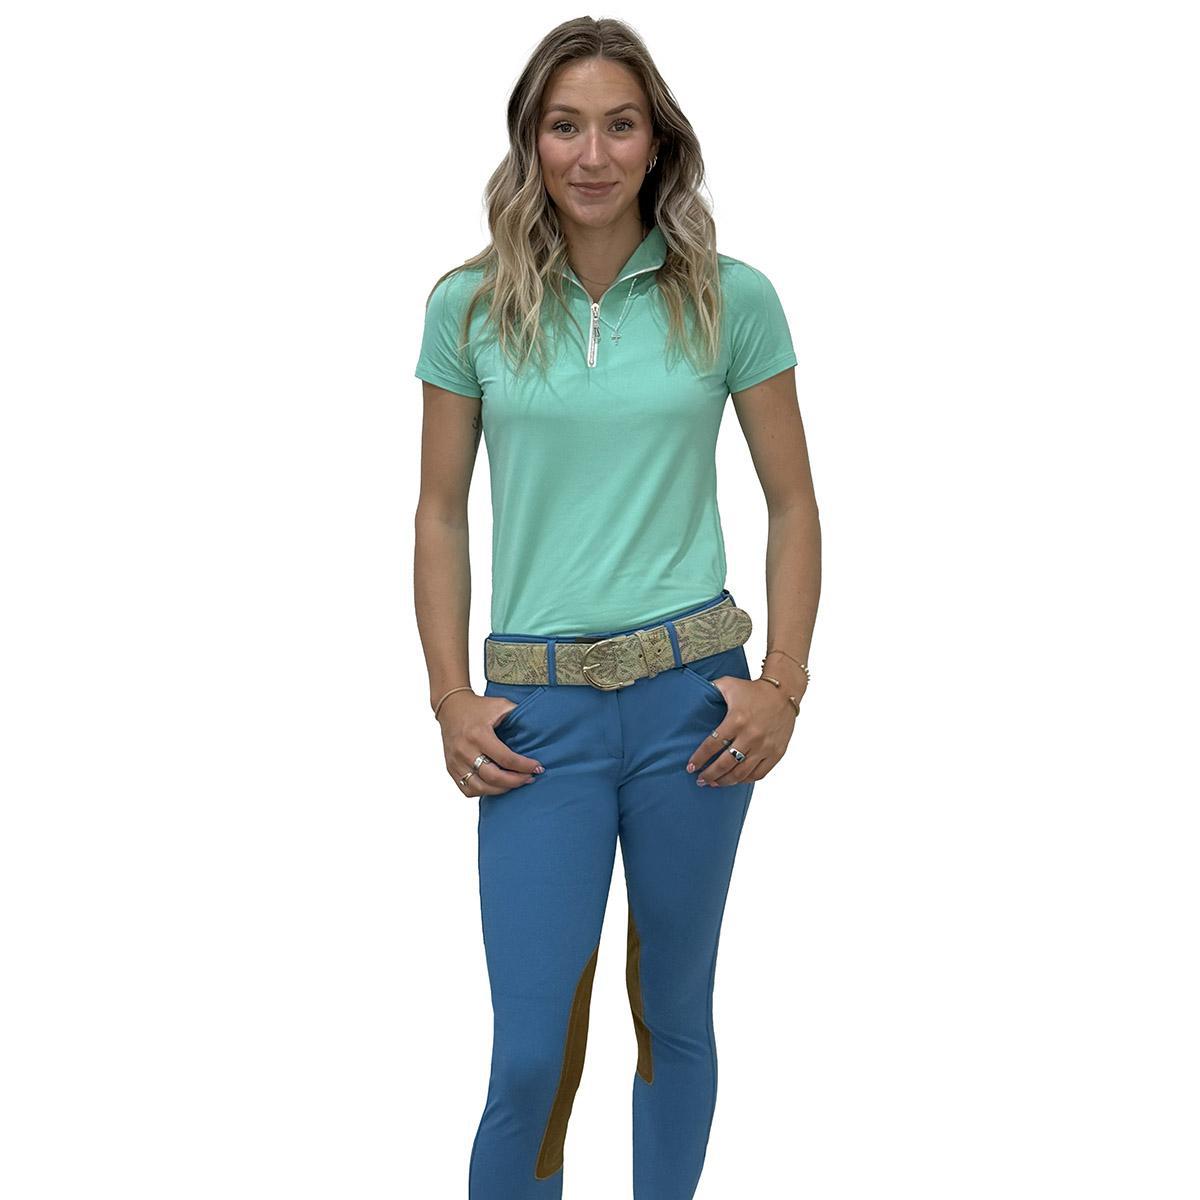 Tailored Sportsman Low Rise Front Zip Vintage Knee Patch Breeches